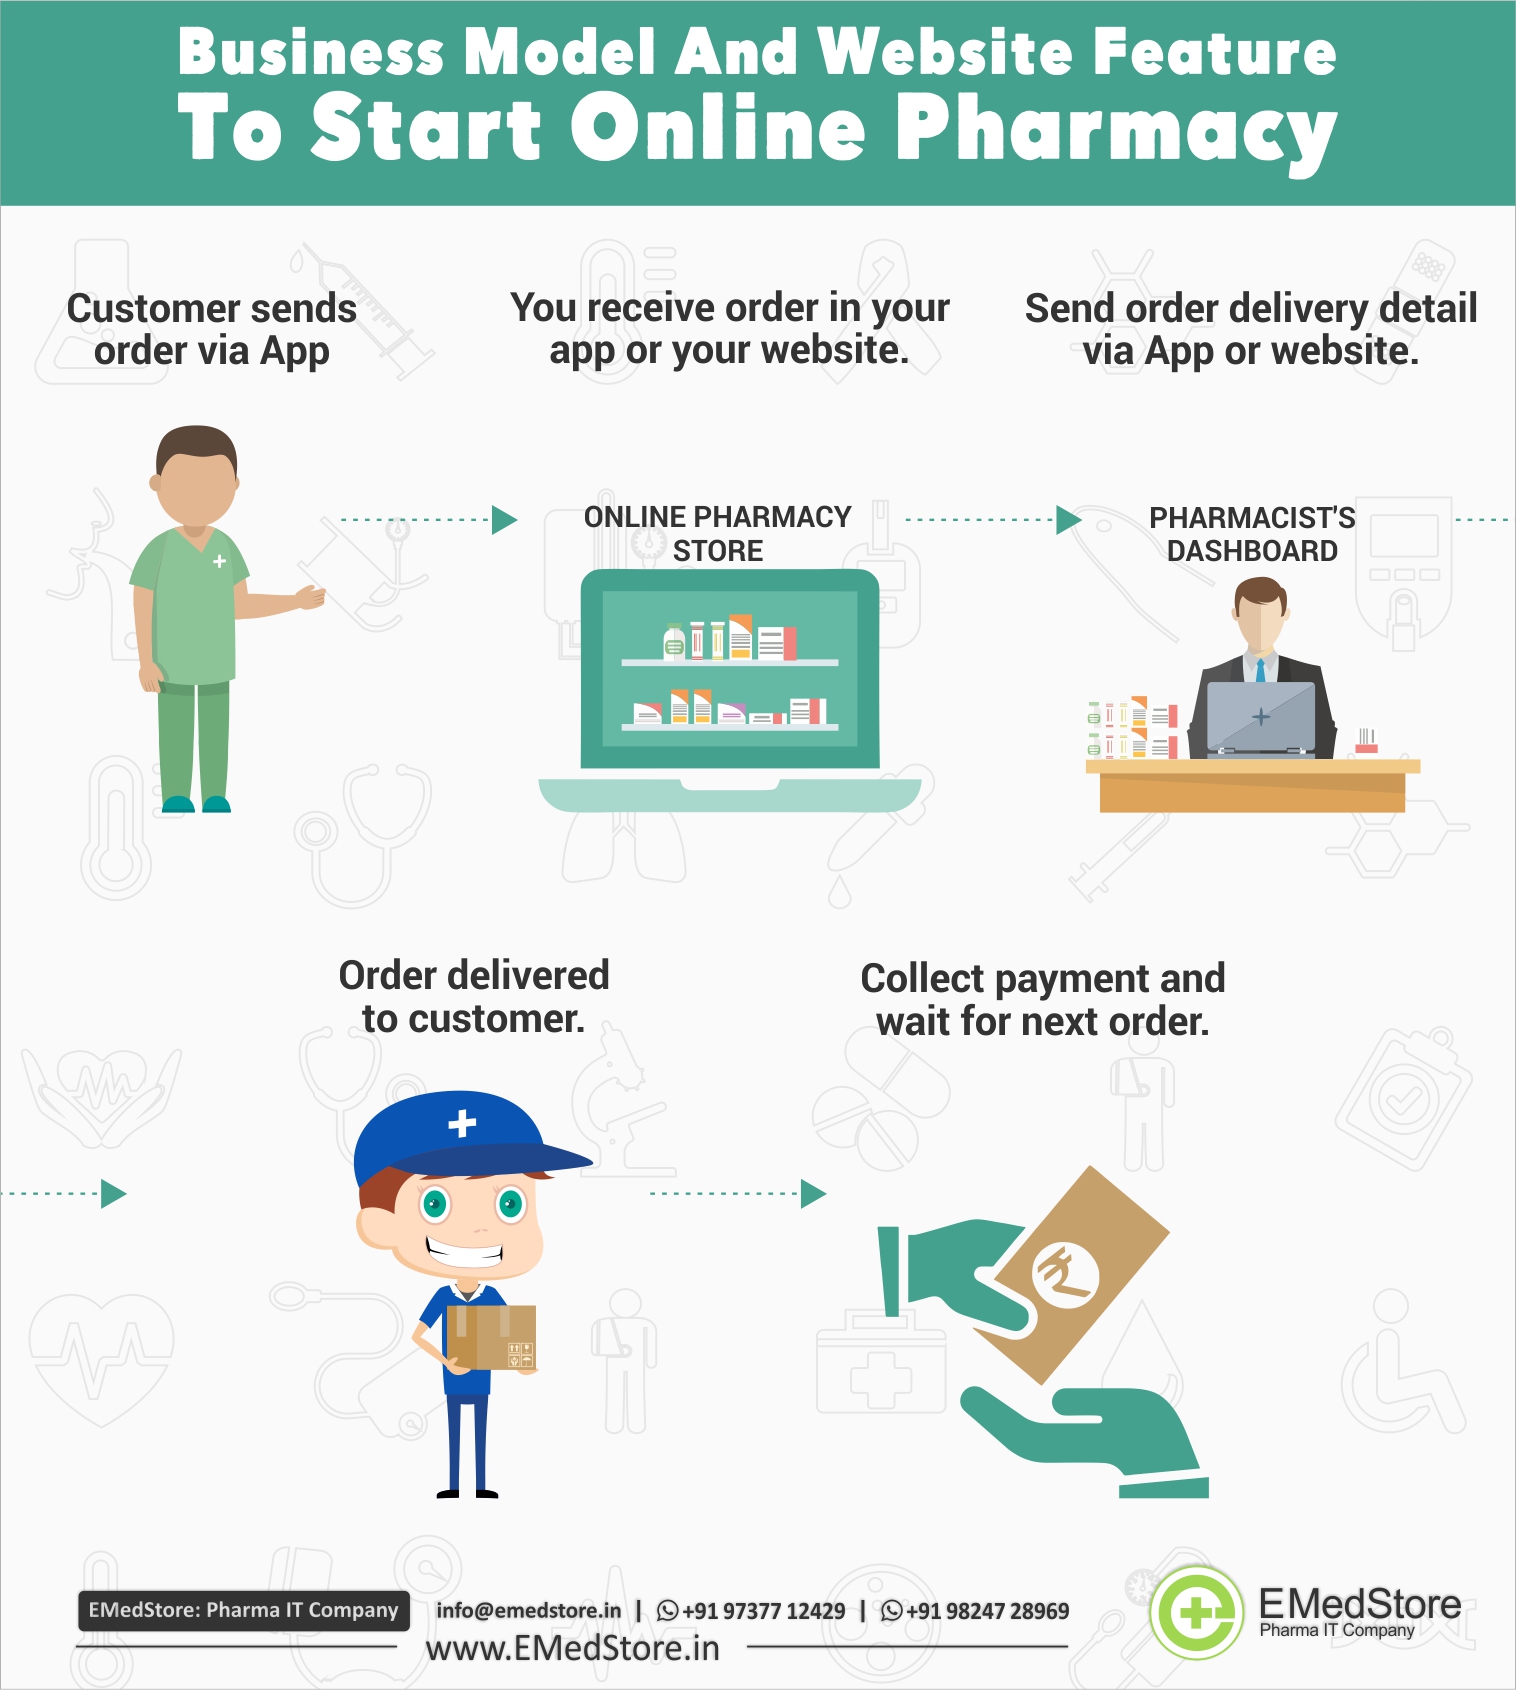 Business Model And Website Feature To Start Online Pharmacy